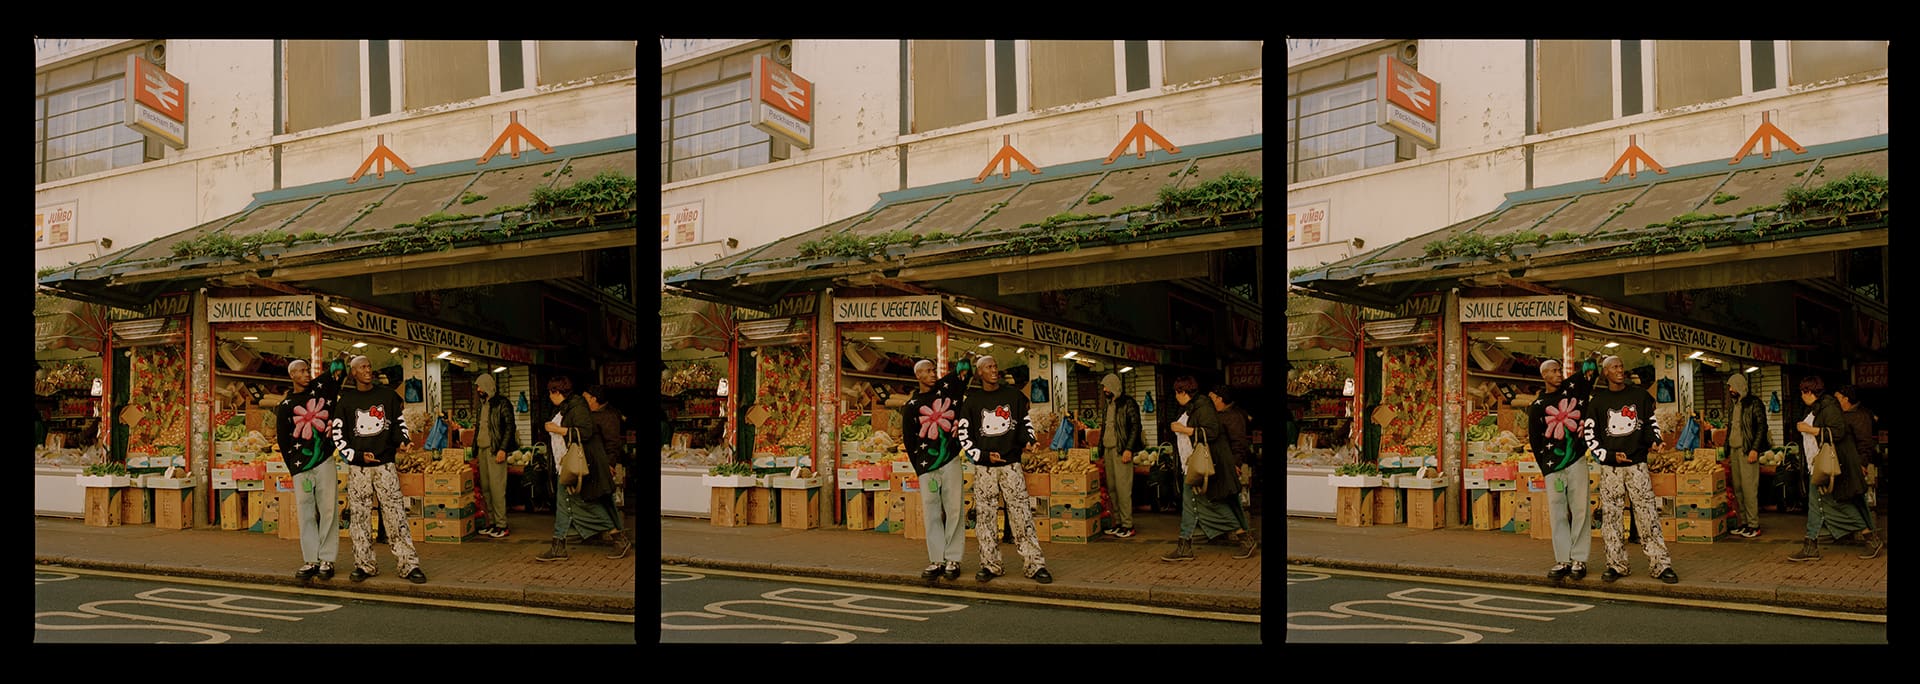 The Flag Twins | A triptych of Kev and Karl Bonsu of The Flag Twins out and about in their hometown of Peckham